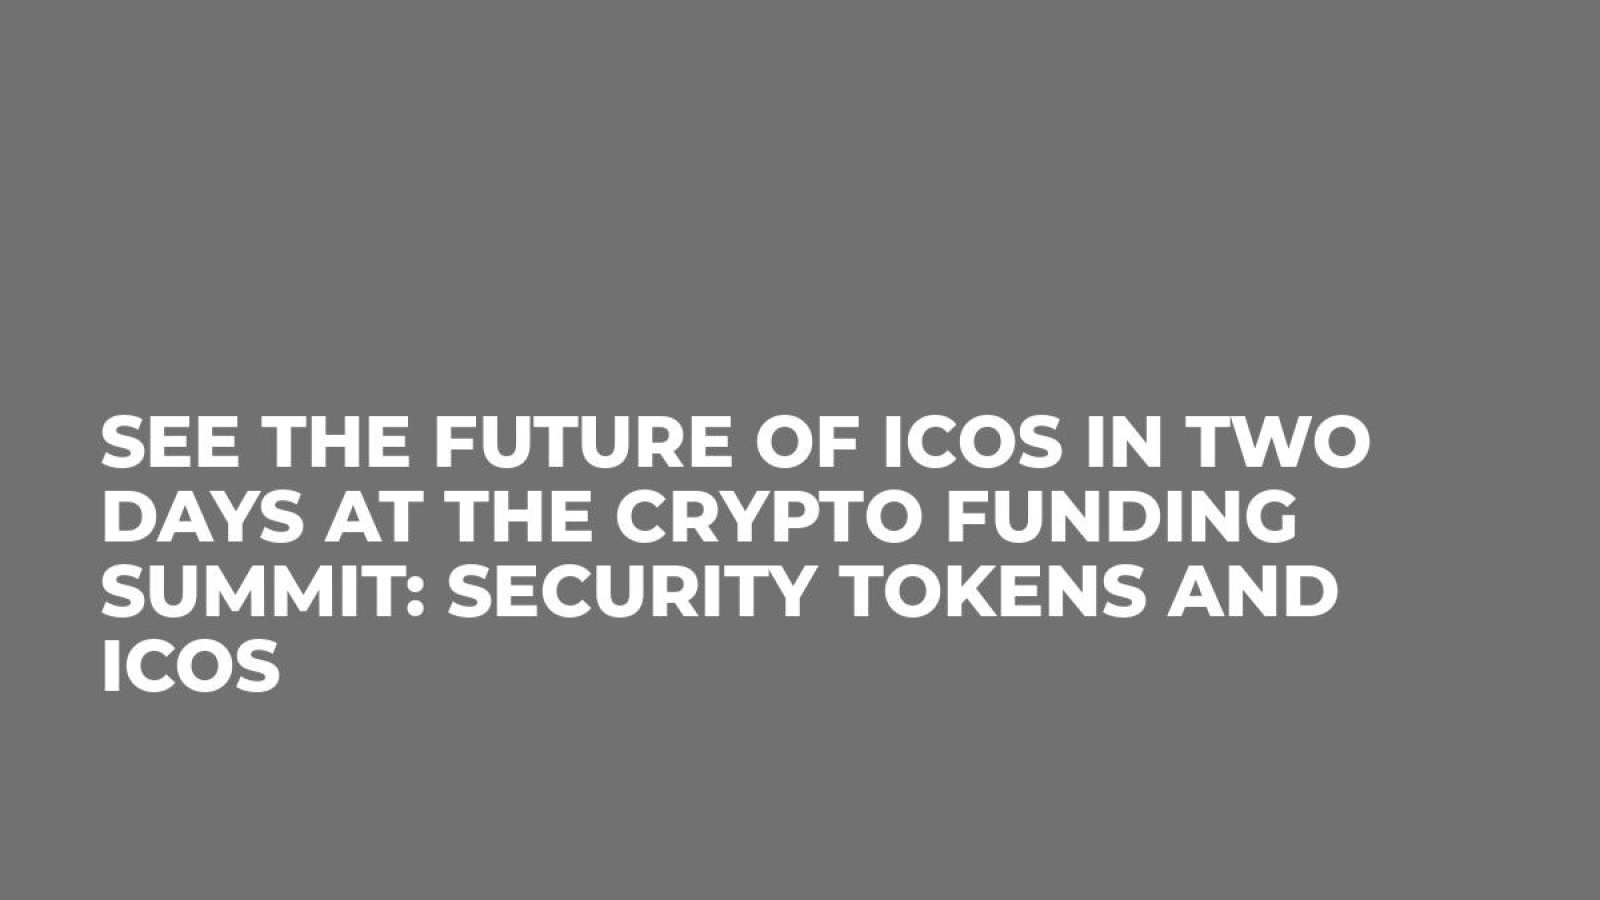 See the Future of ICOs in Two Days at the Crypto Funding Summit: Security Tokens and ICOs